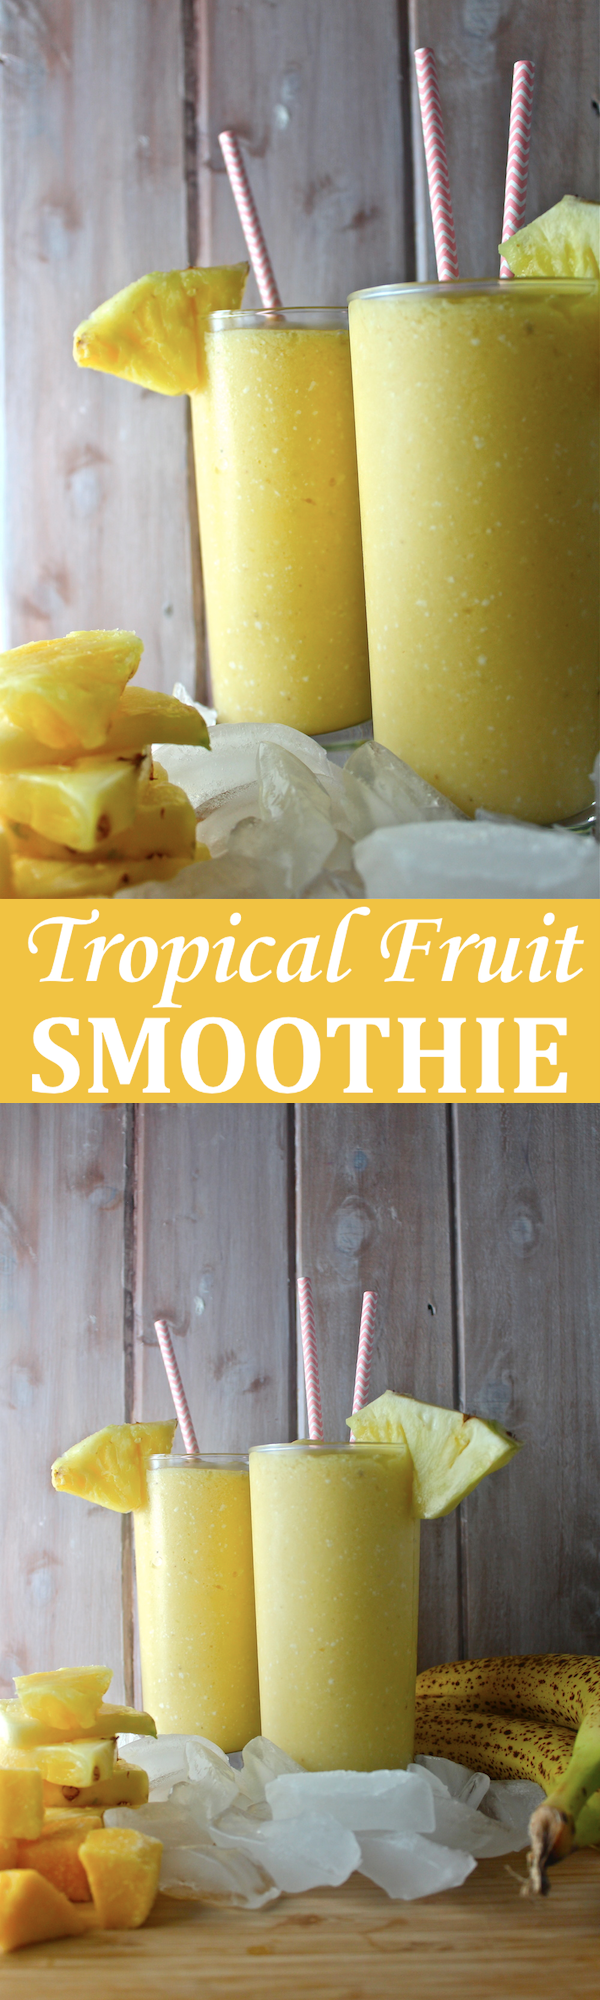 This Tropical Fruit Smoothie - with lots of pineapple, mango, and rich coconut milk - is fruity, frosty, tart, and creamy! | The Millennial Cook #winterrecipe #smoothie #orange #banana #mango #pineapple #coconut